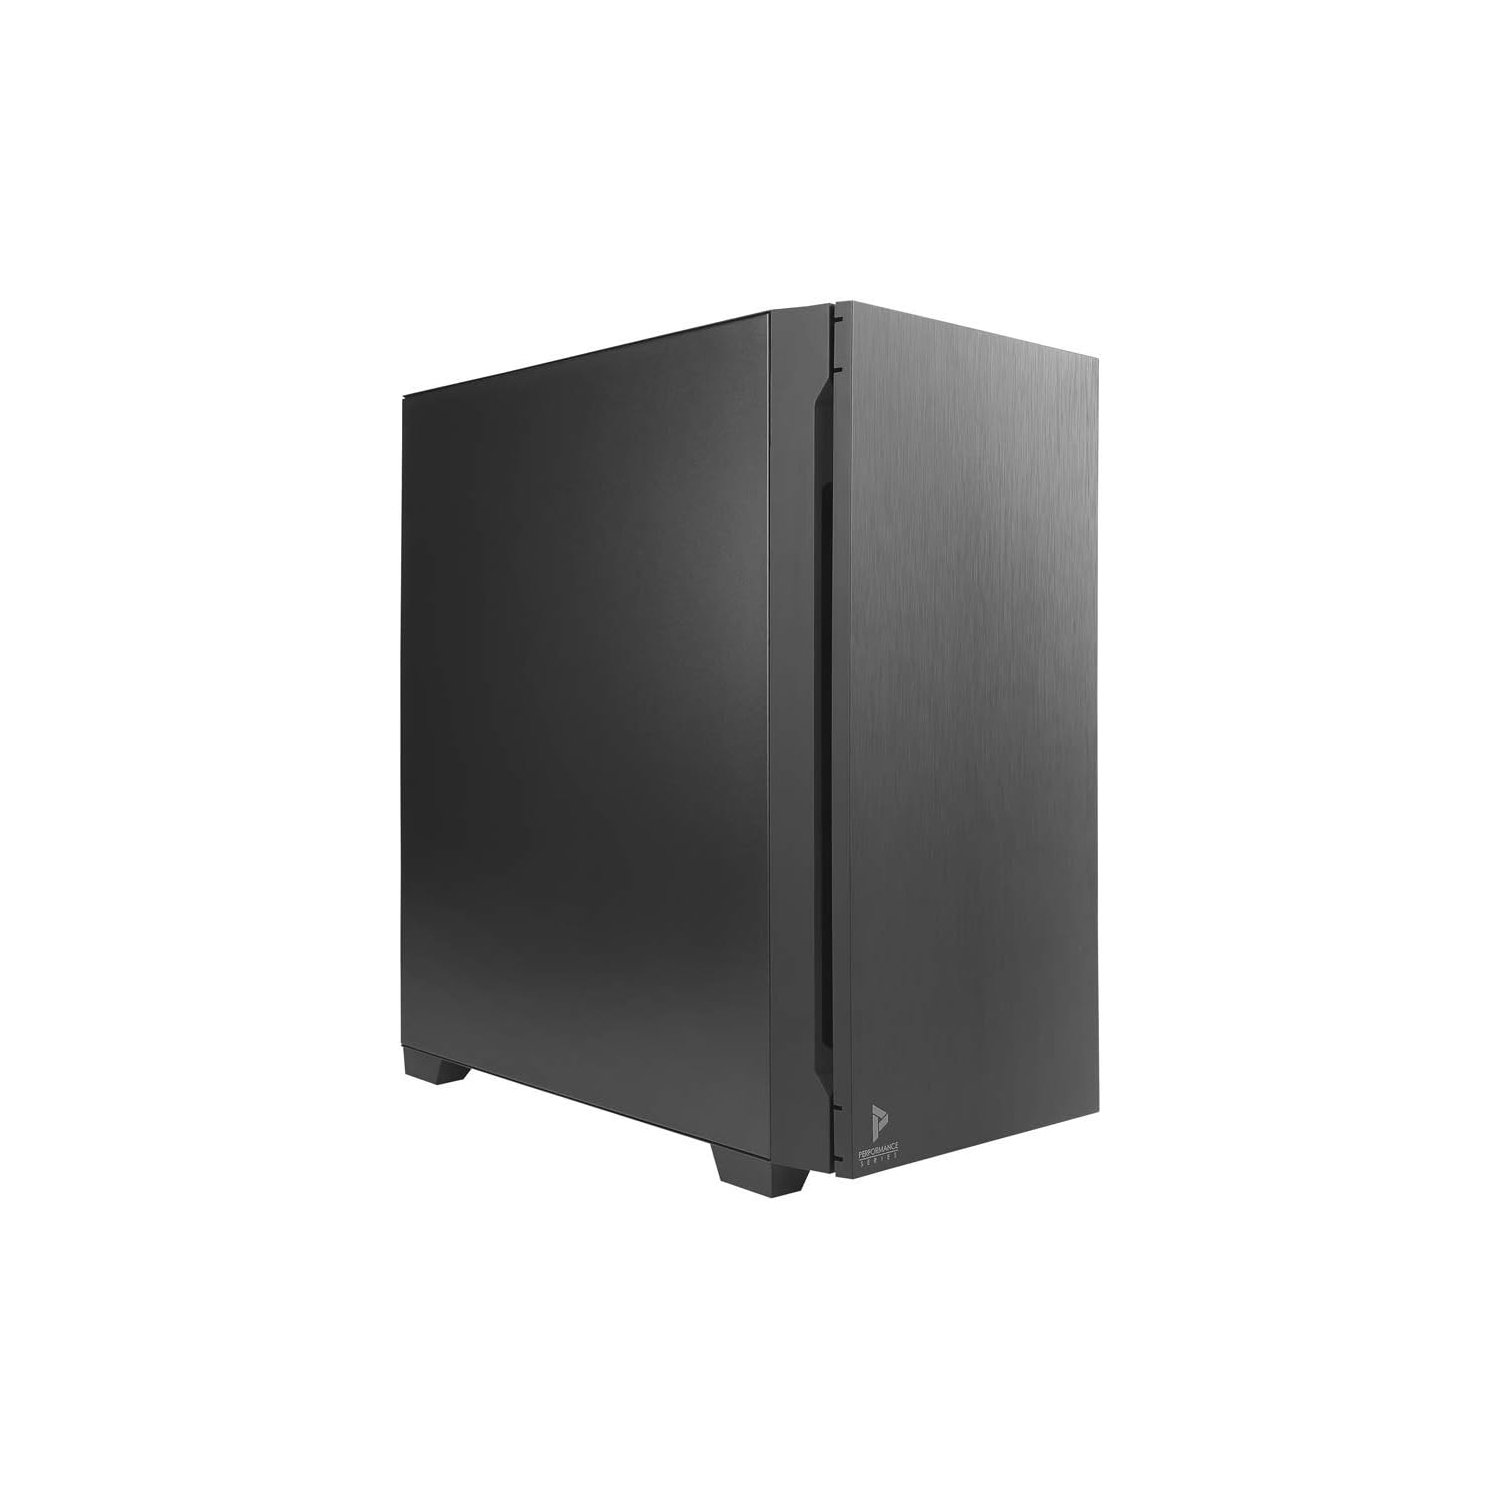 Antec P10 FLUX, F-LUX Platform, 5x120mm Fans Included, Air-Concentrating Filter, 5.25" ODD, Fan-Speed Control, Sound-Dampening Side Panels, Mid-Tower Case